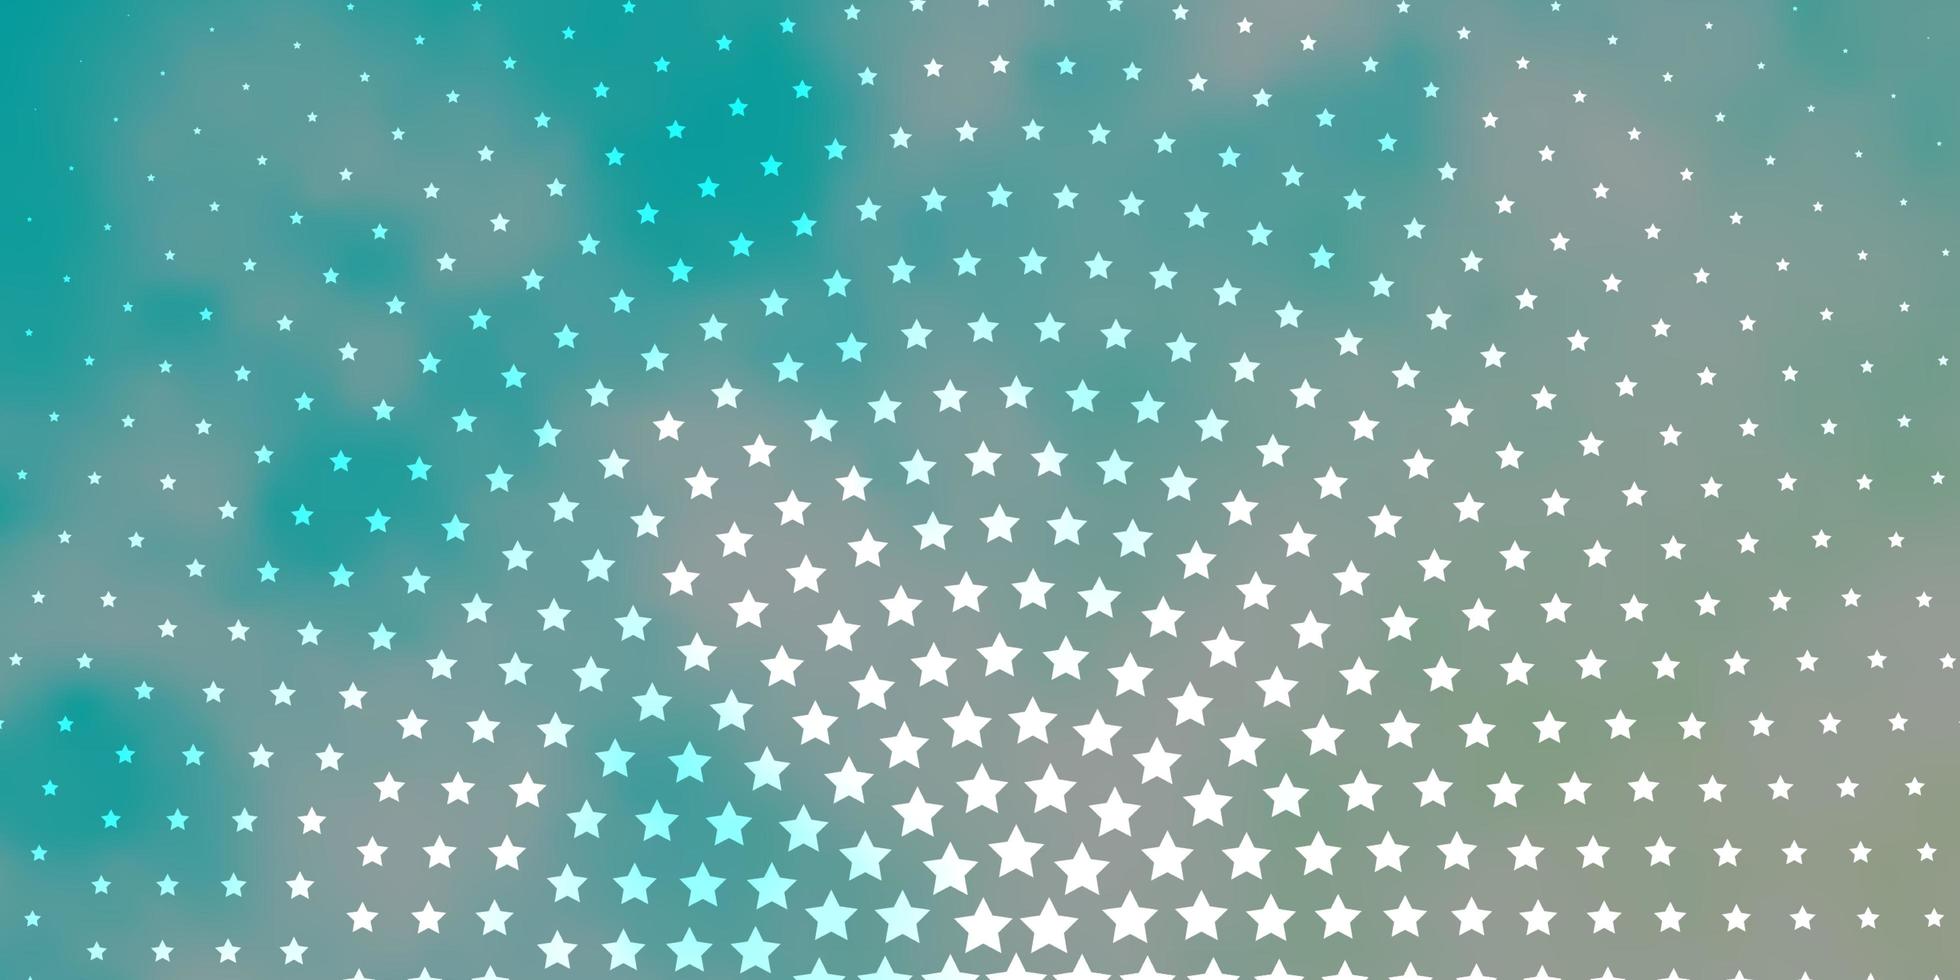 Light BLUE vector template with neon stars